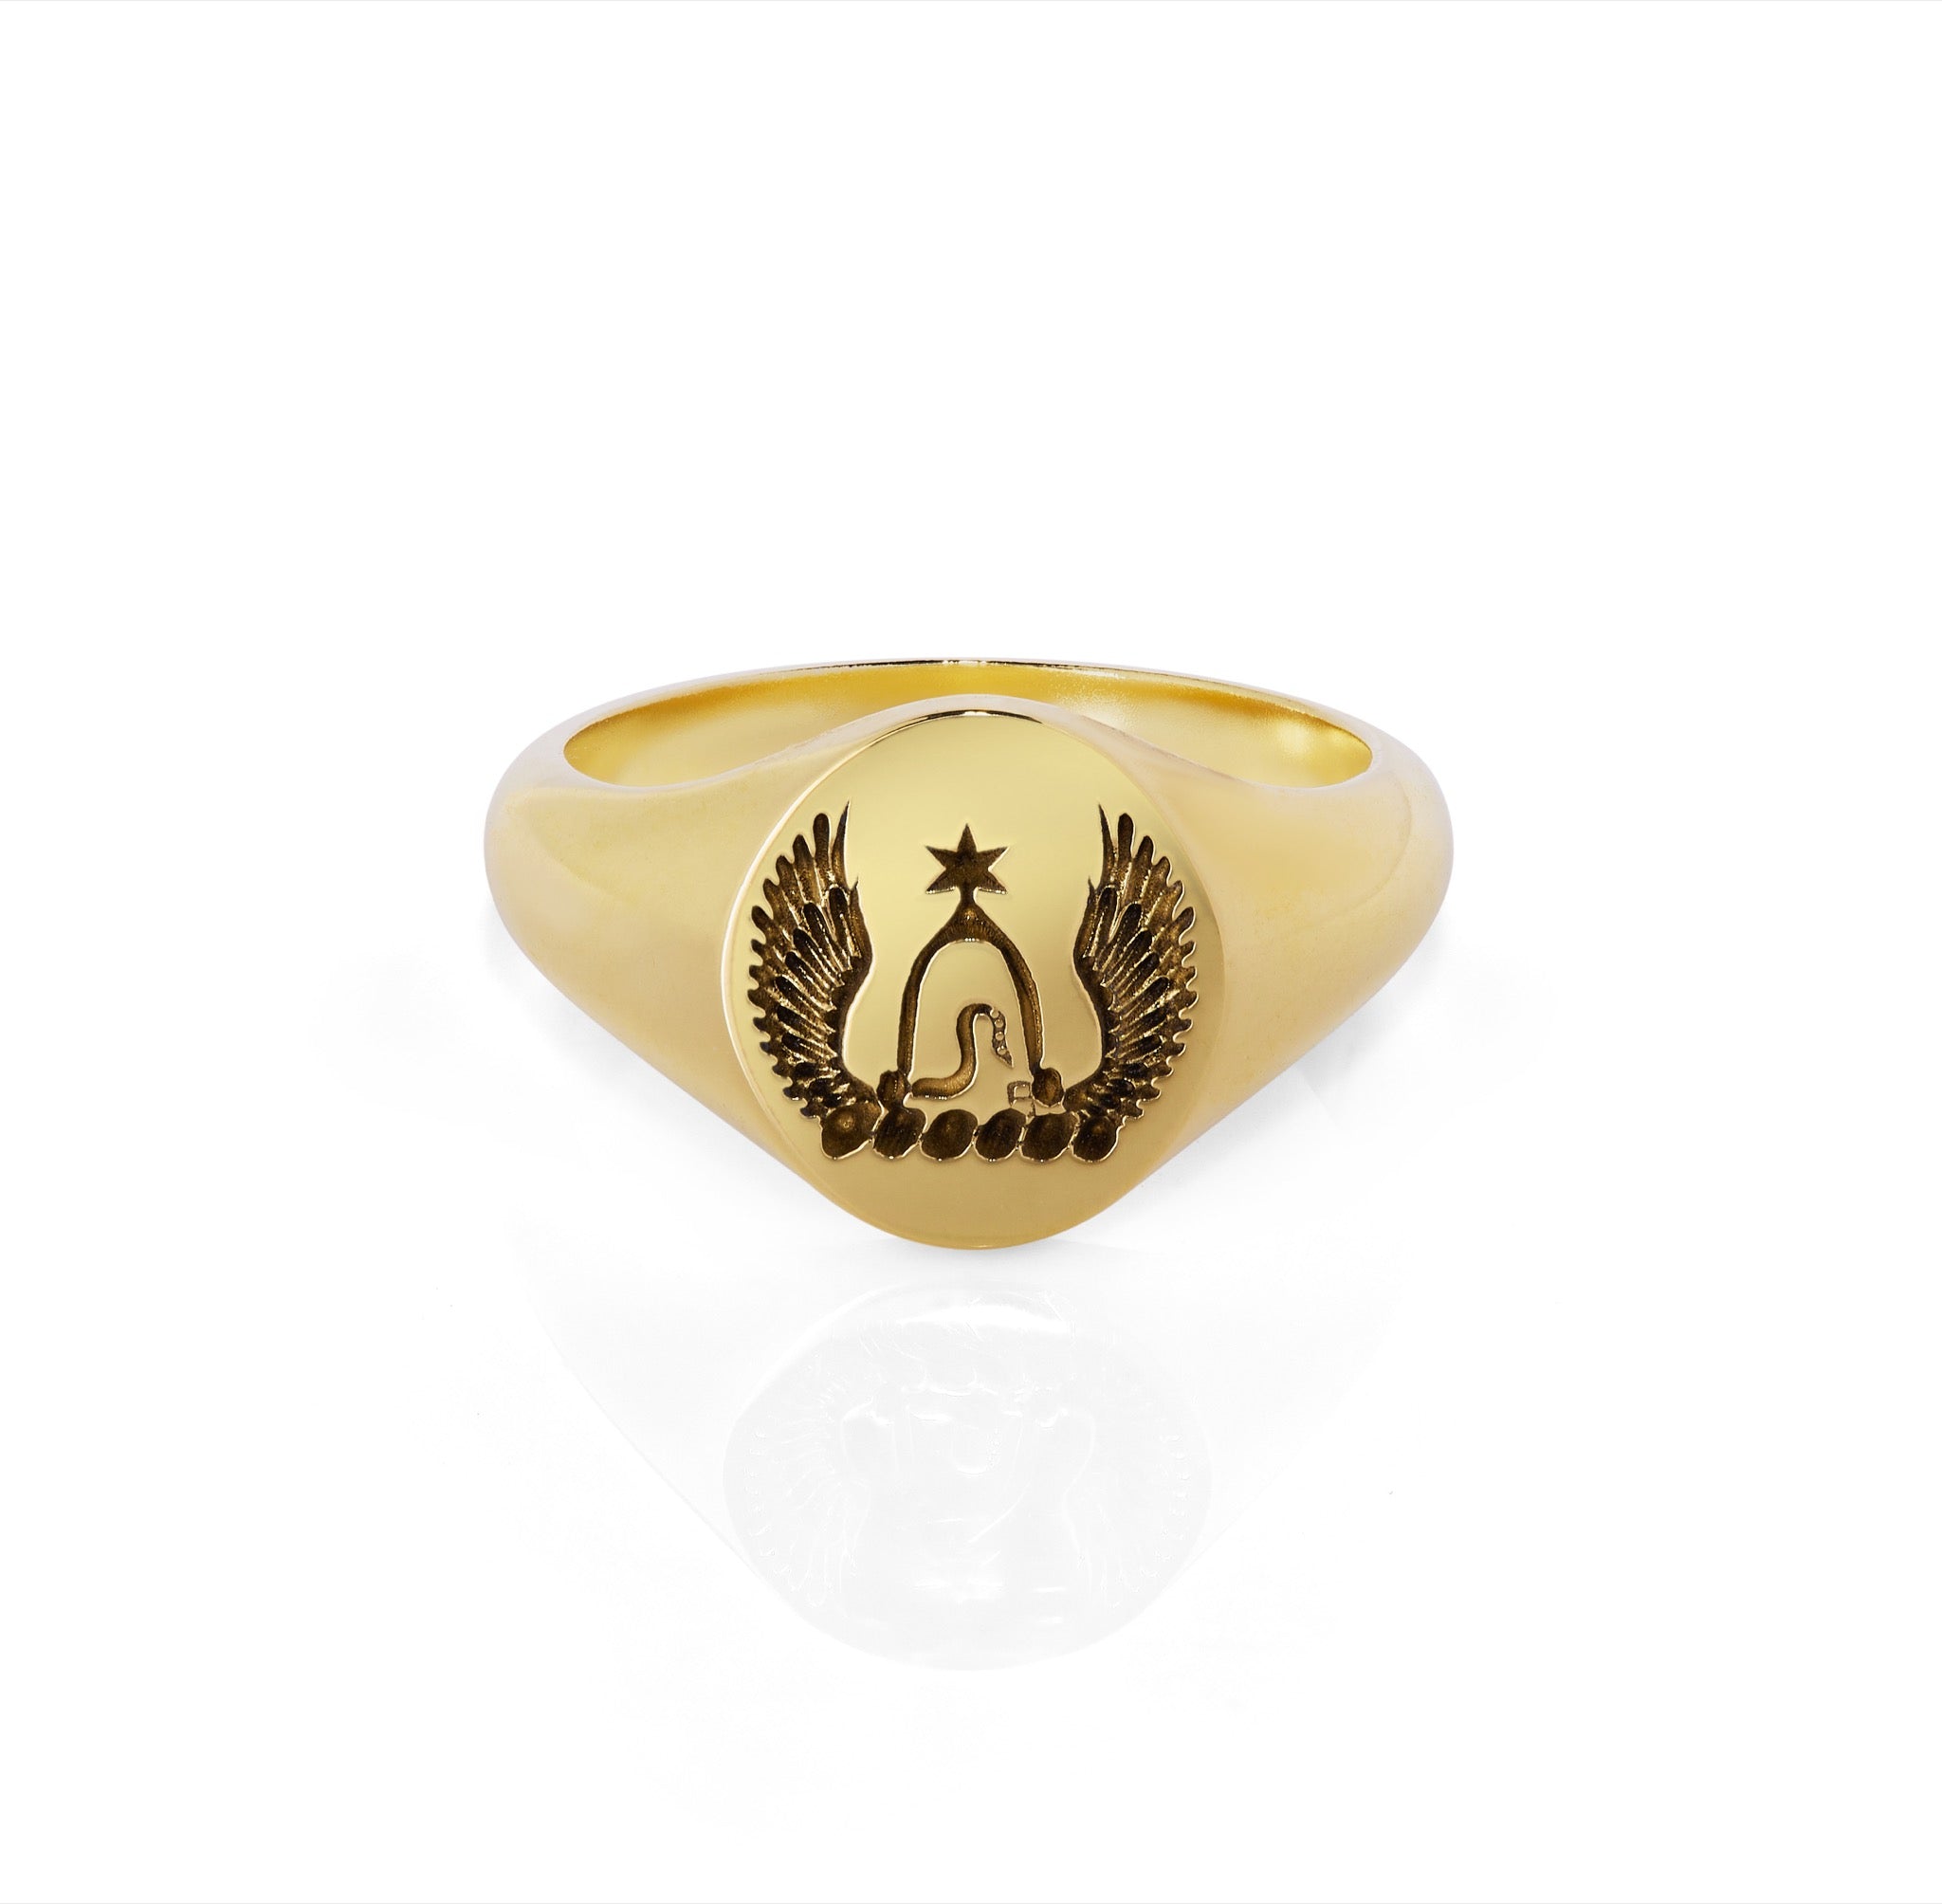 Scalloped signet ring in yellow gold with family crest engraving on a white background